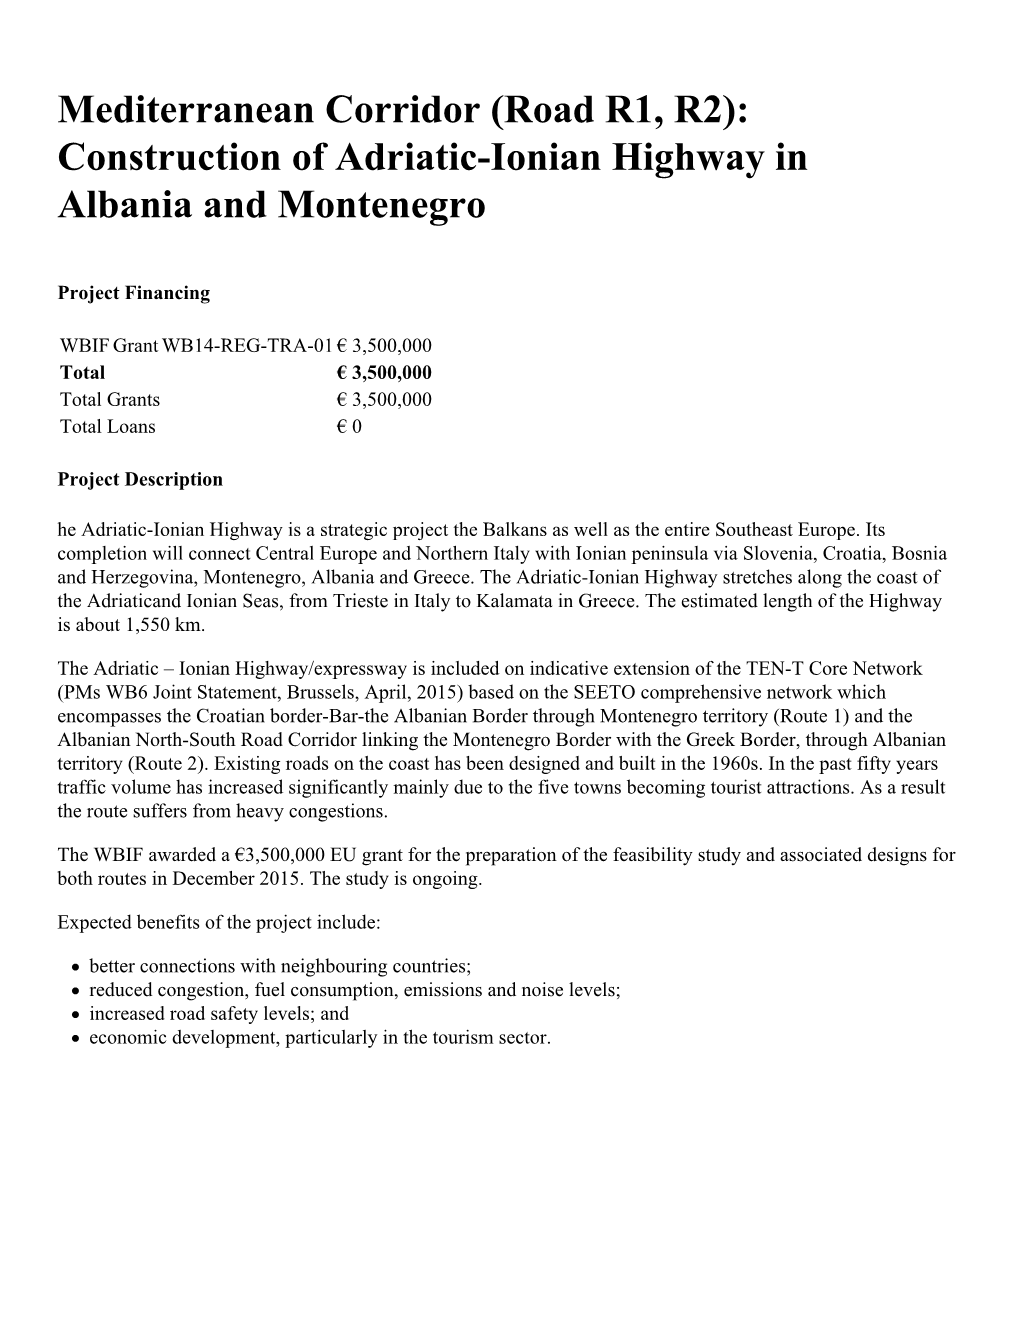 (Road R1, R2): Construction of Adriatic-Ionian Highway in Albania and Montenegro